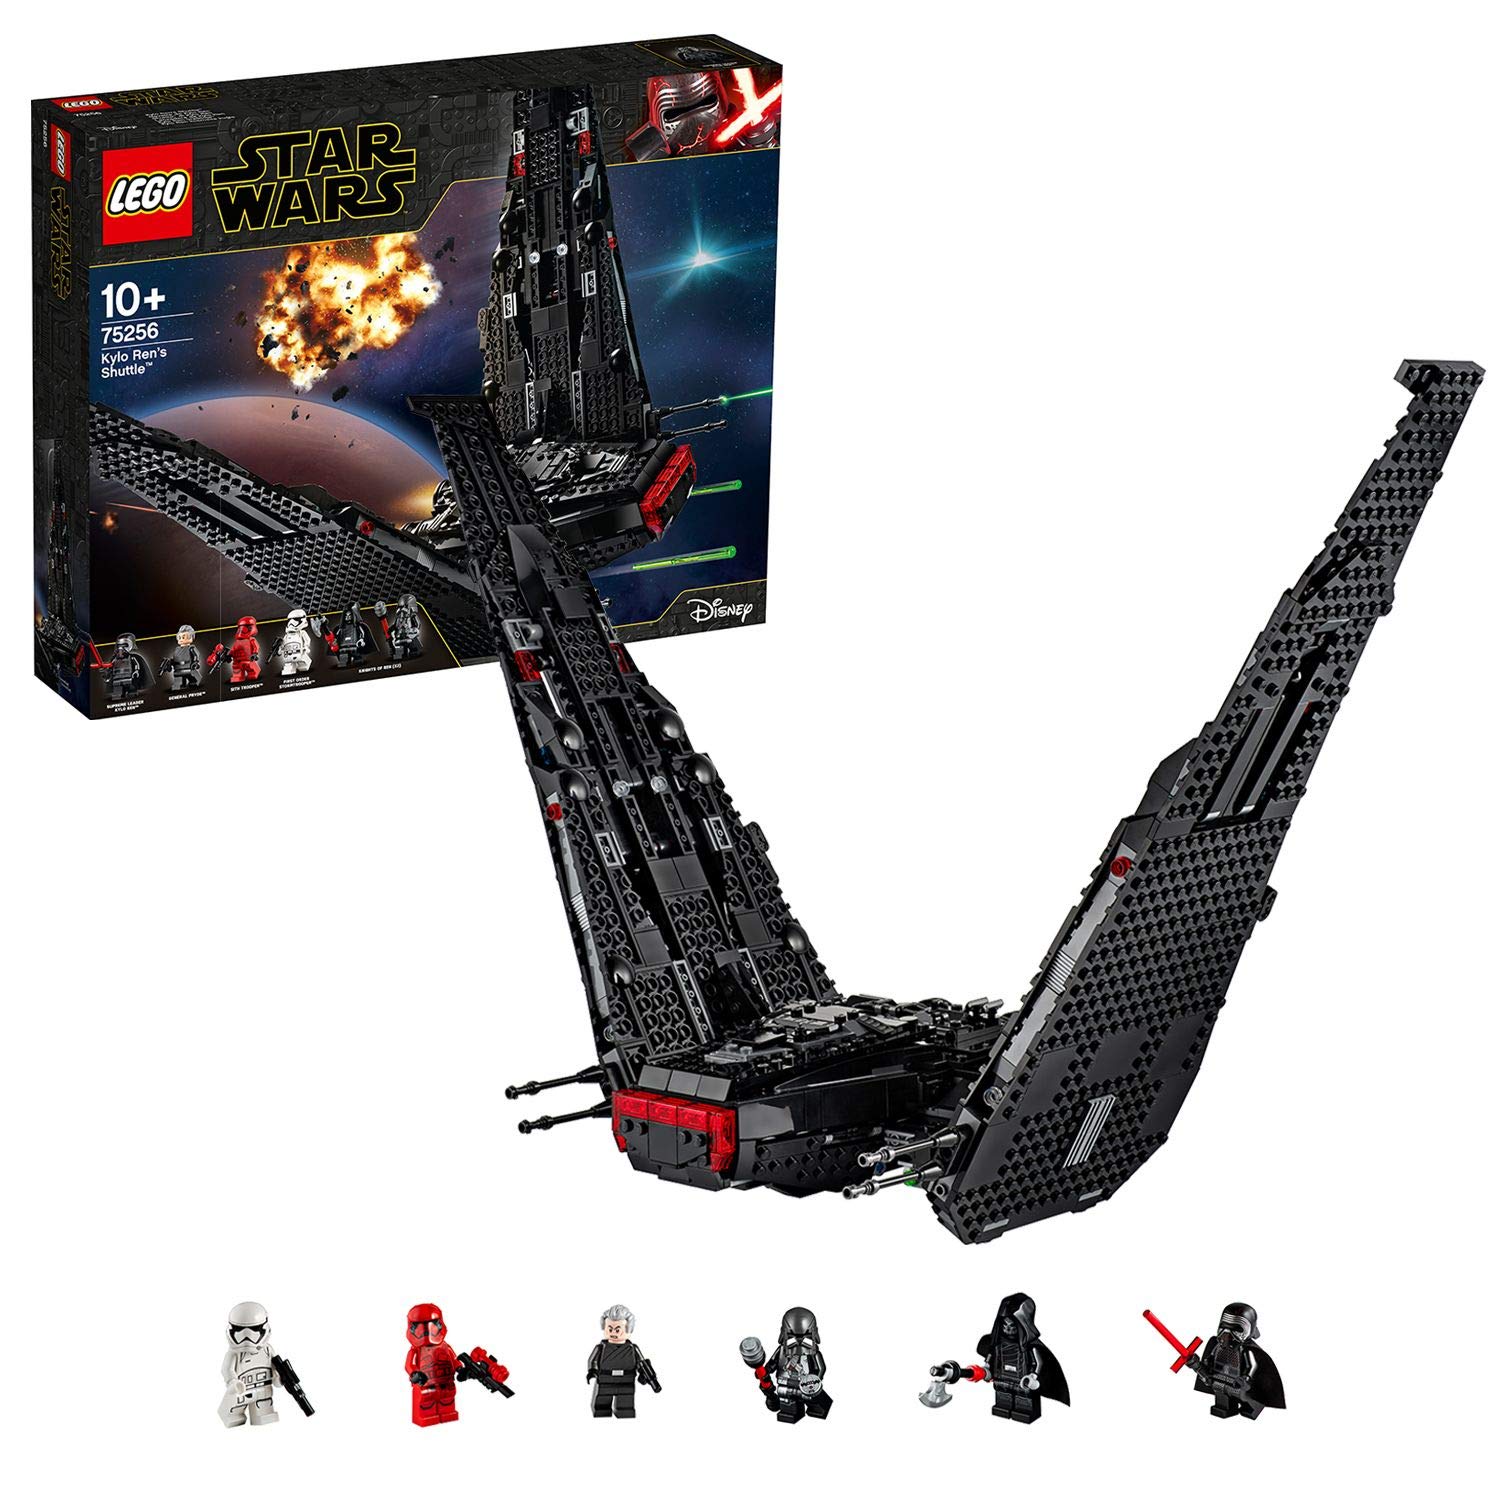 Lego Star Wars 75256 Conf_Core11_Ep9 V29 Product Title Missing Submission, 